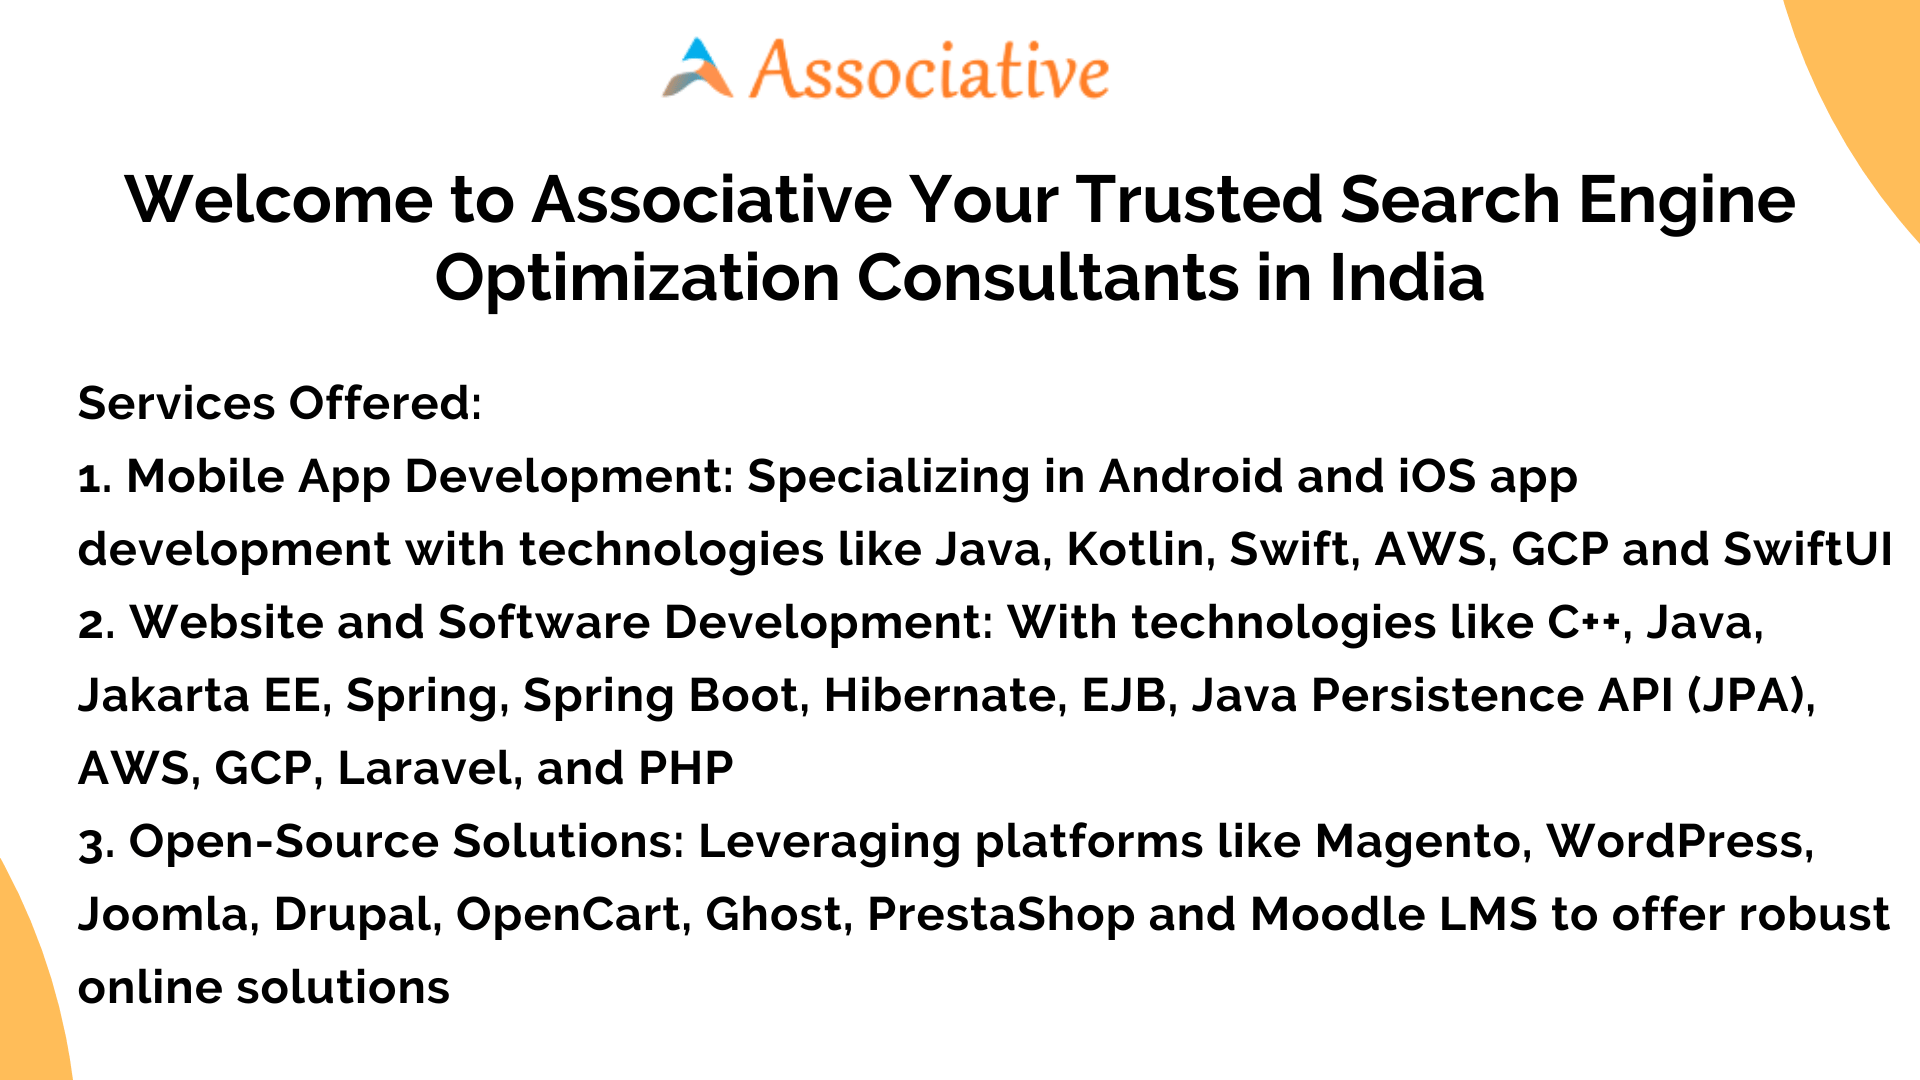 Welcome to Associative Your Trusted Search Engine Optimization Consultants in India